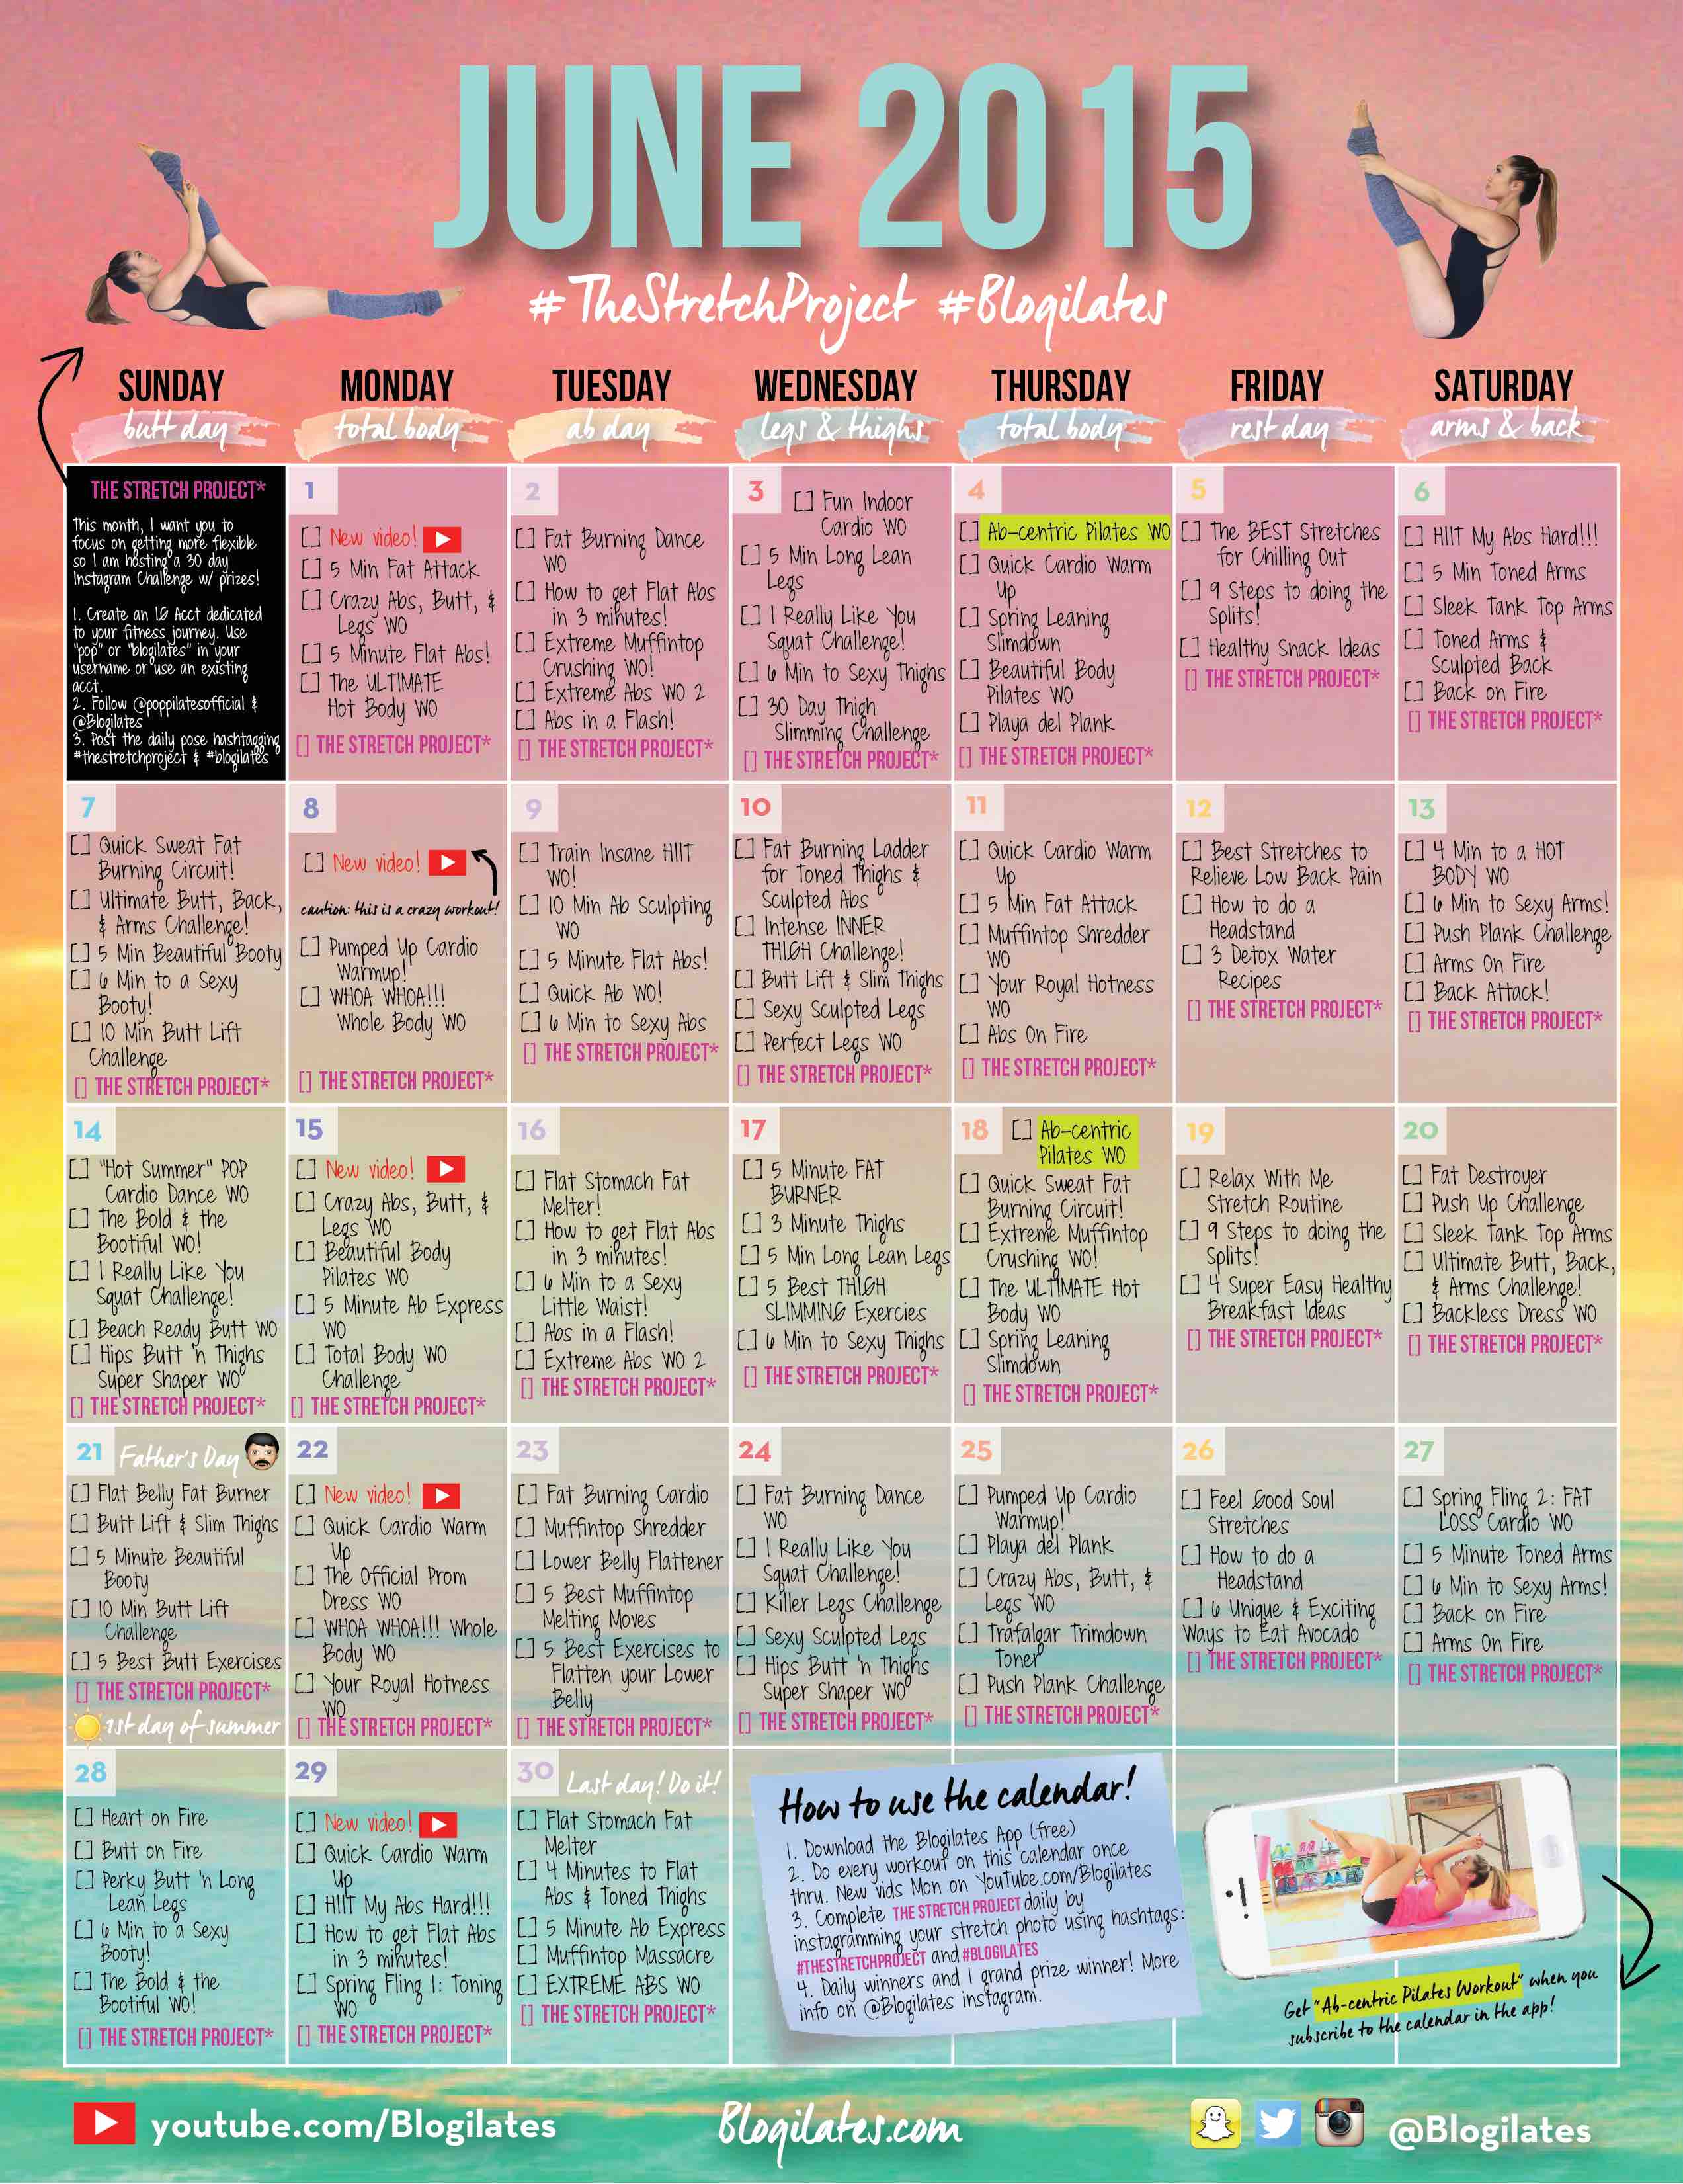 June Workout Calendar Sign Up For Newsletter The Pw Will Be Emailed Blogilates